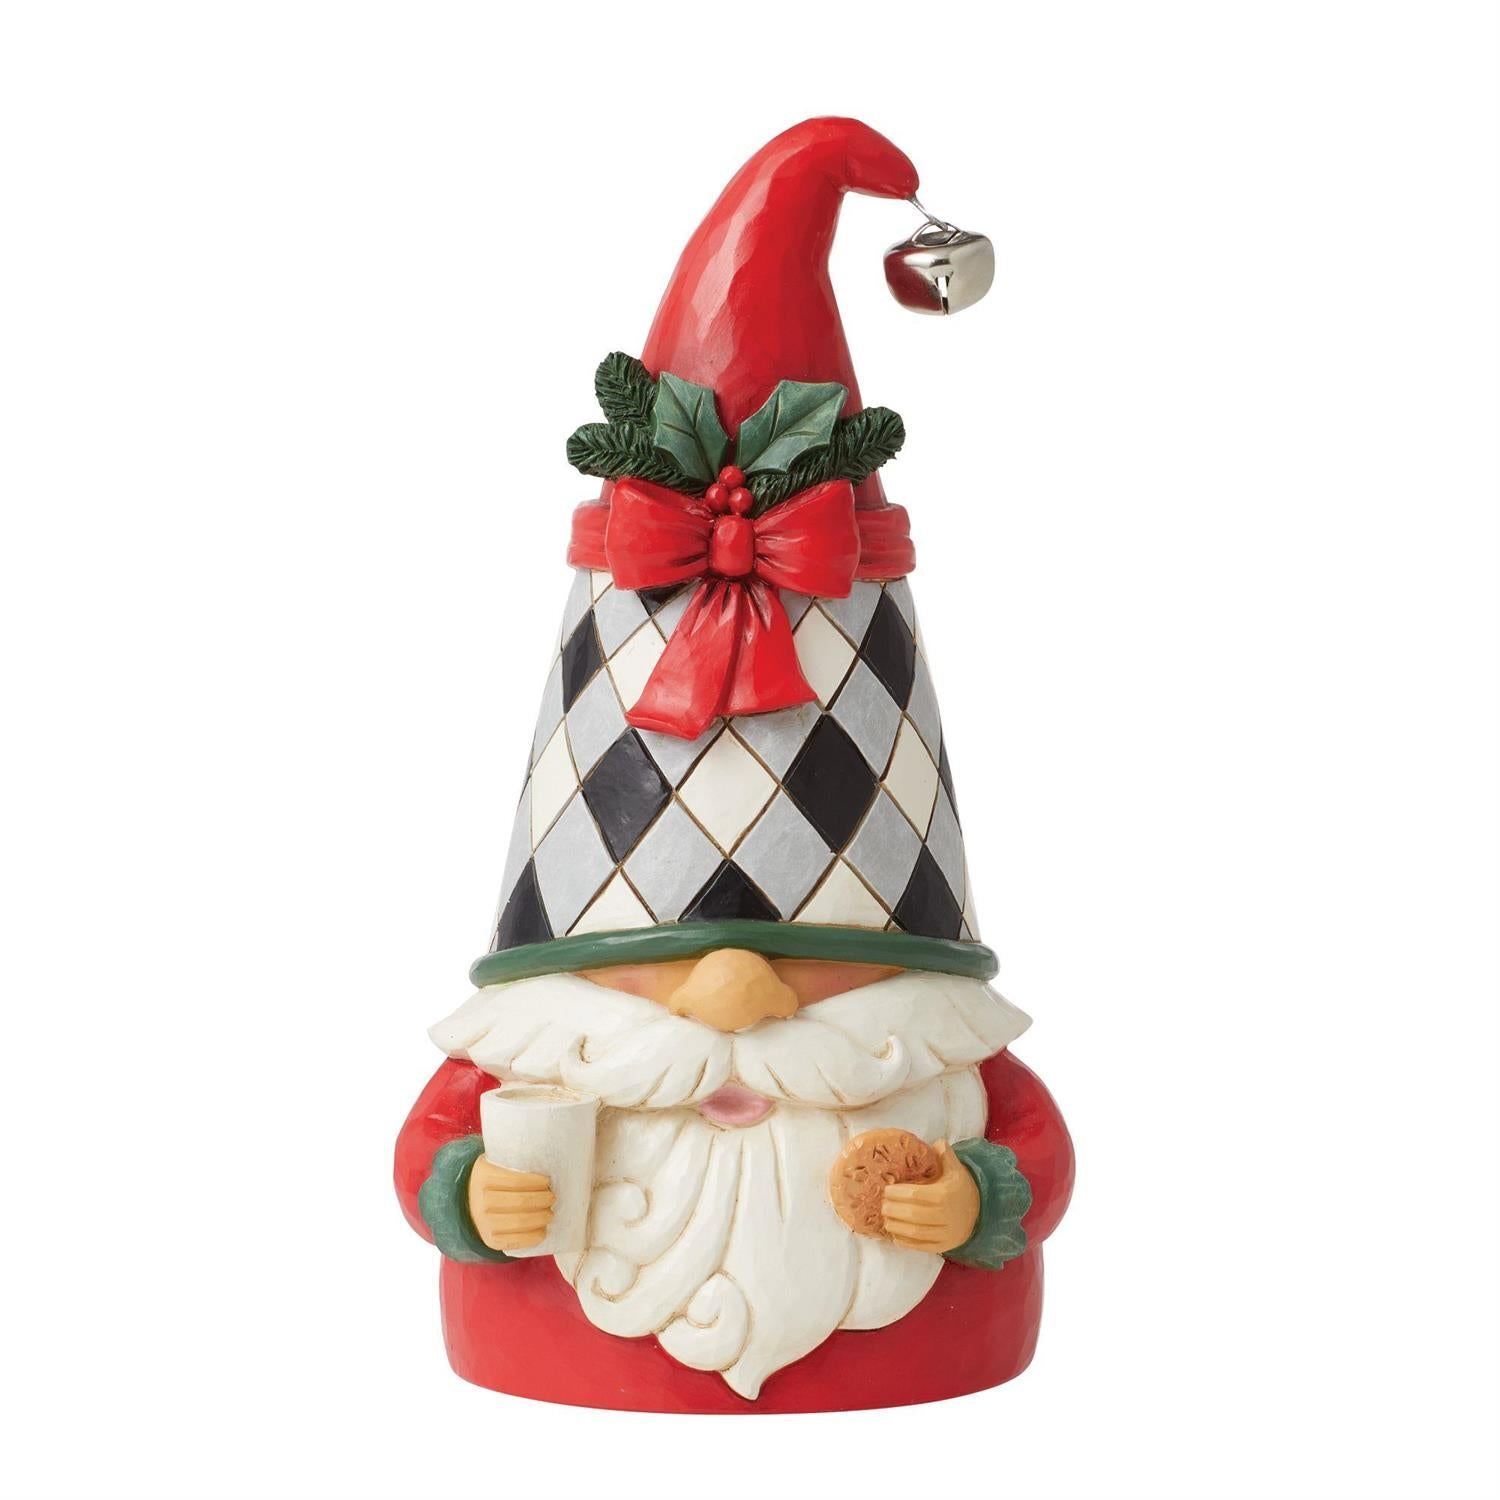 Jim Shore Heartwood Creek: Highland Glen Gnome with Milk & Cookies Fig 6012870